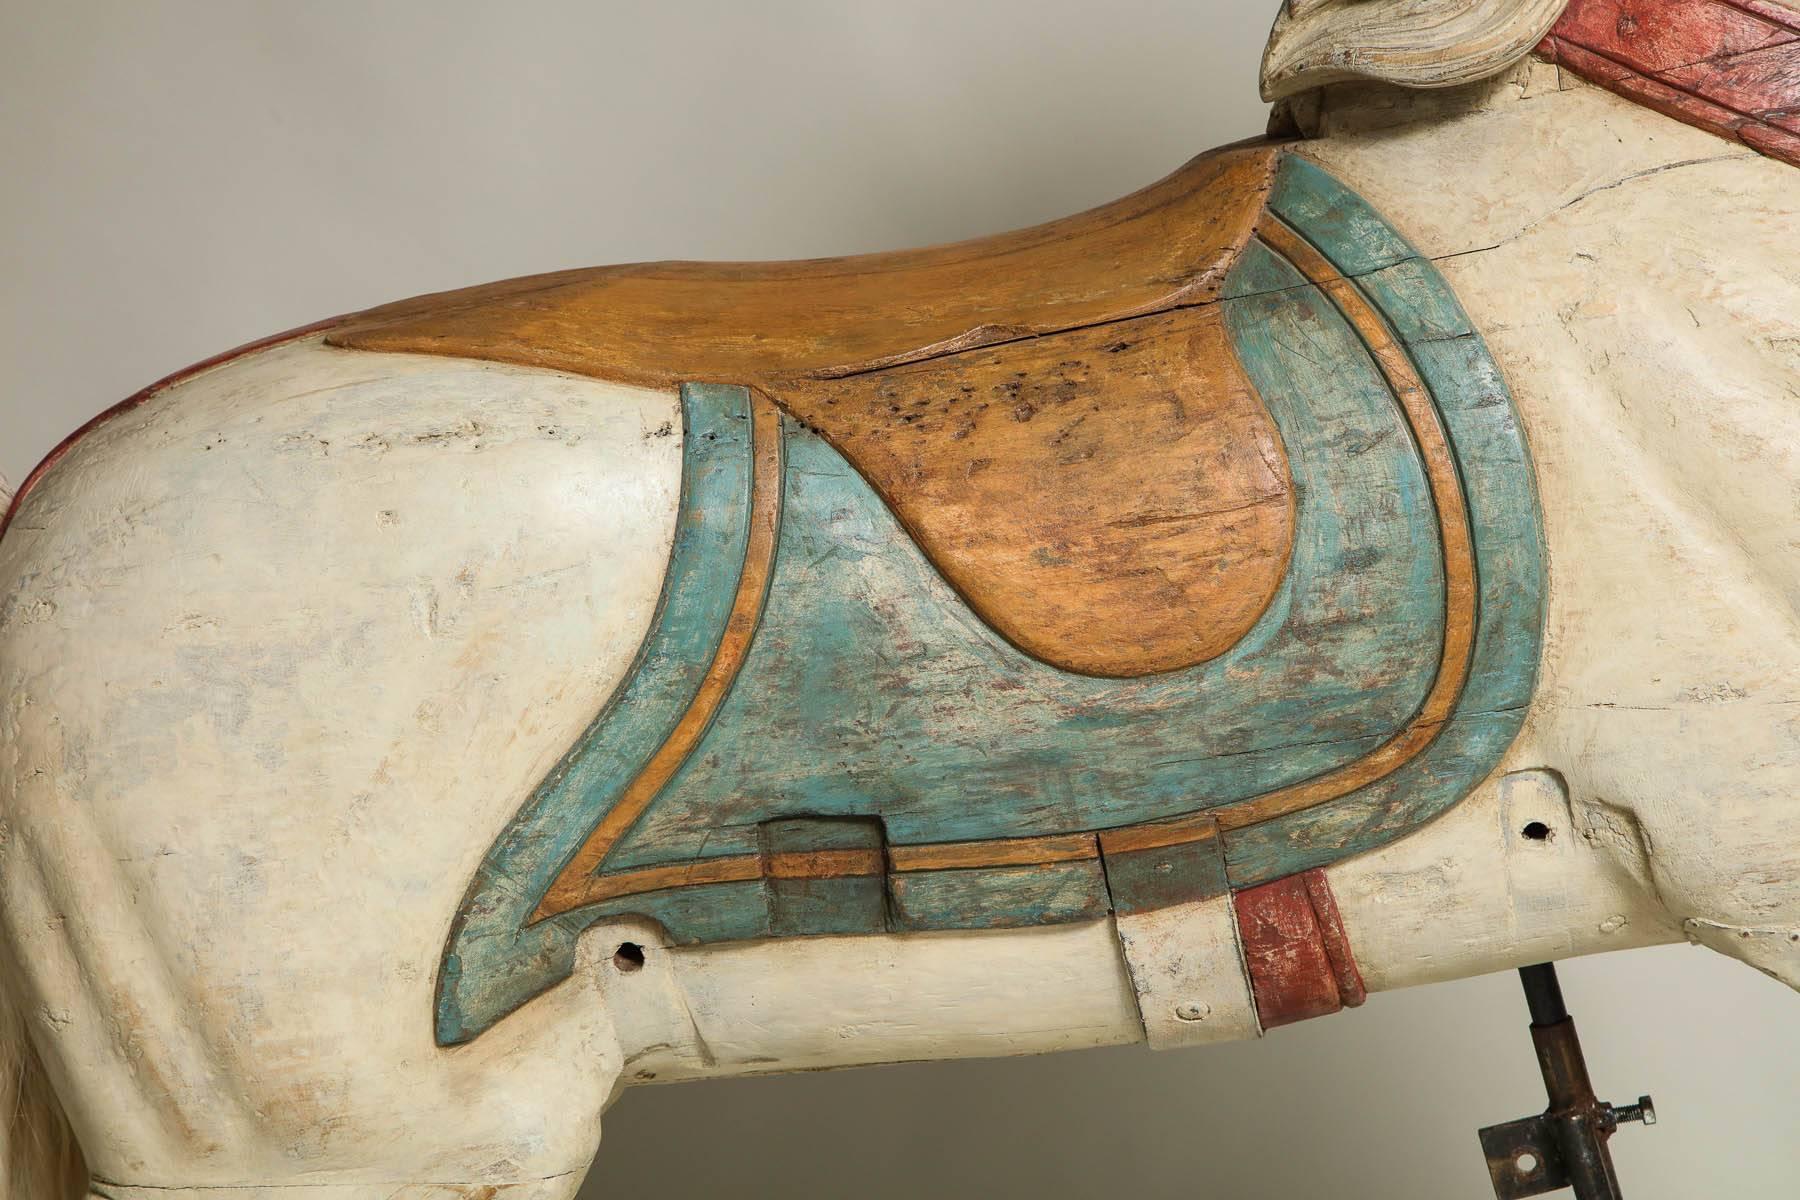 A carved and painted wood carousel figure of a white chahut horse with flowing main and hair tail by master carver Fredrich Heyn, Neustadt am Orla, Germany. Heyn was the leading German carver of carousel figures, and his work embodies the very best